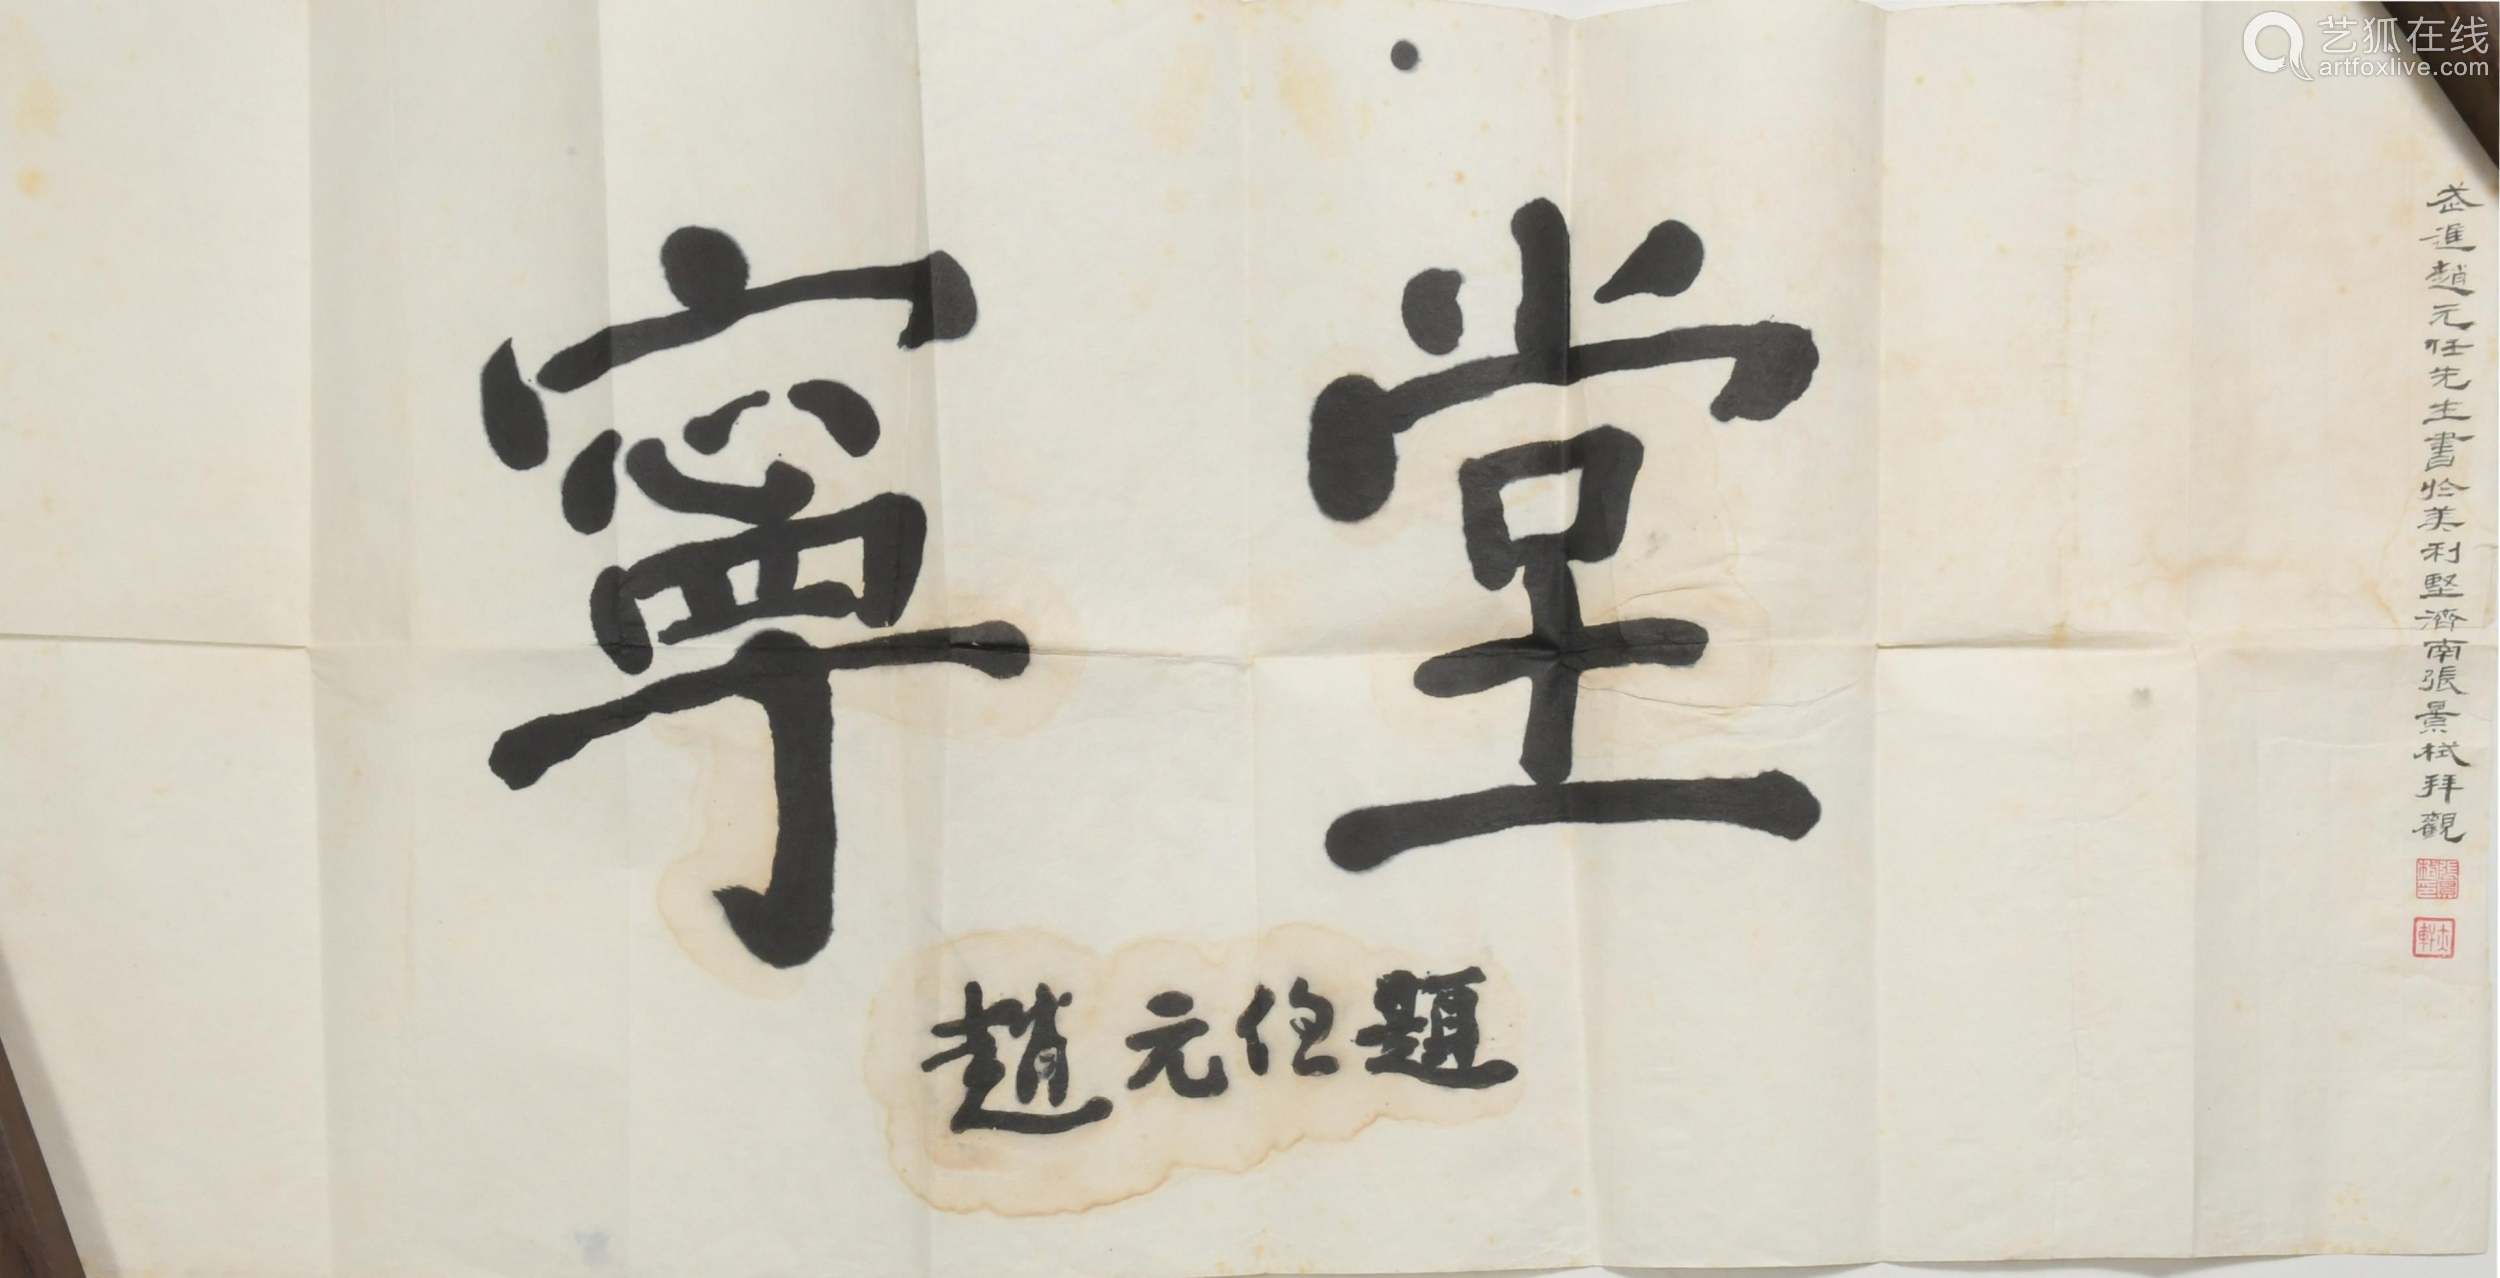 chinese calligraphy by zhao yuanren, with letter赵元任 "宁堂"